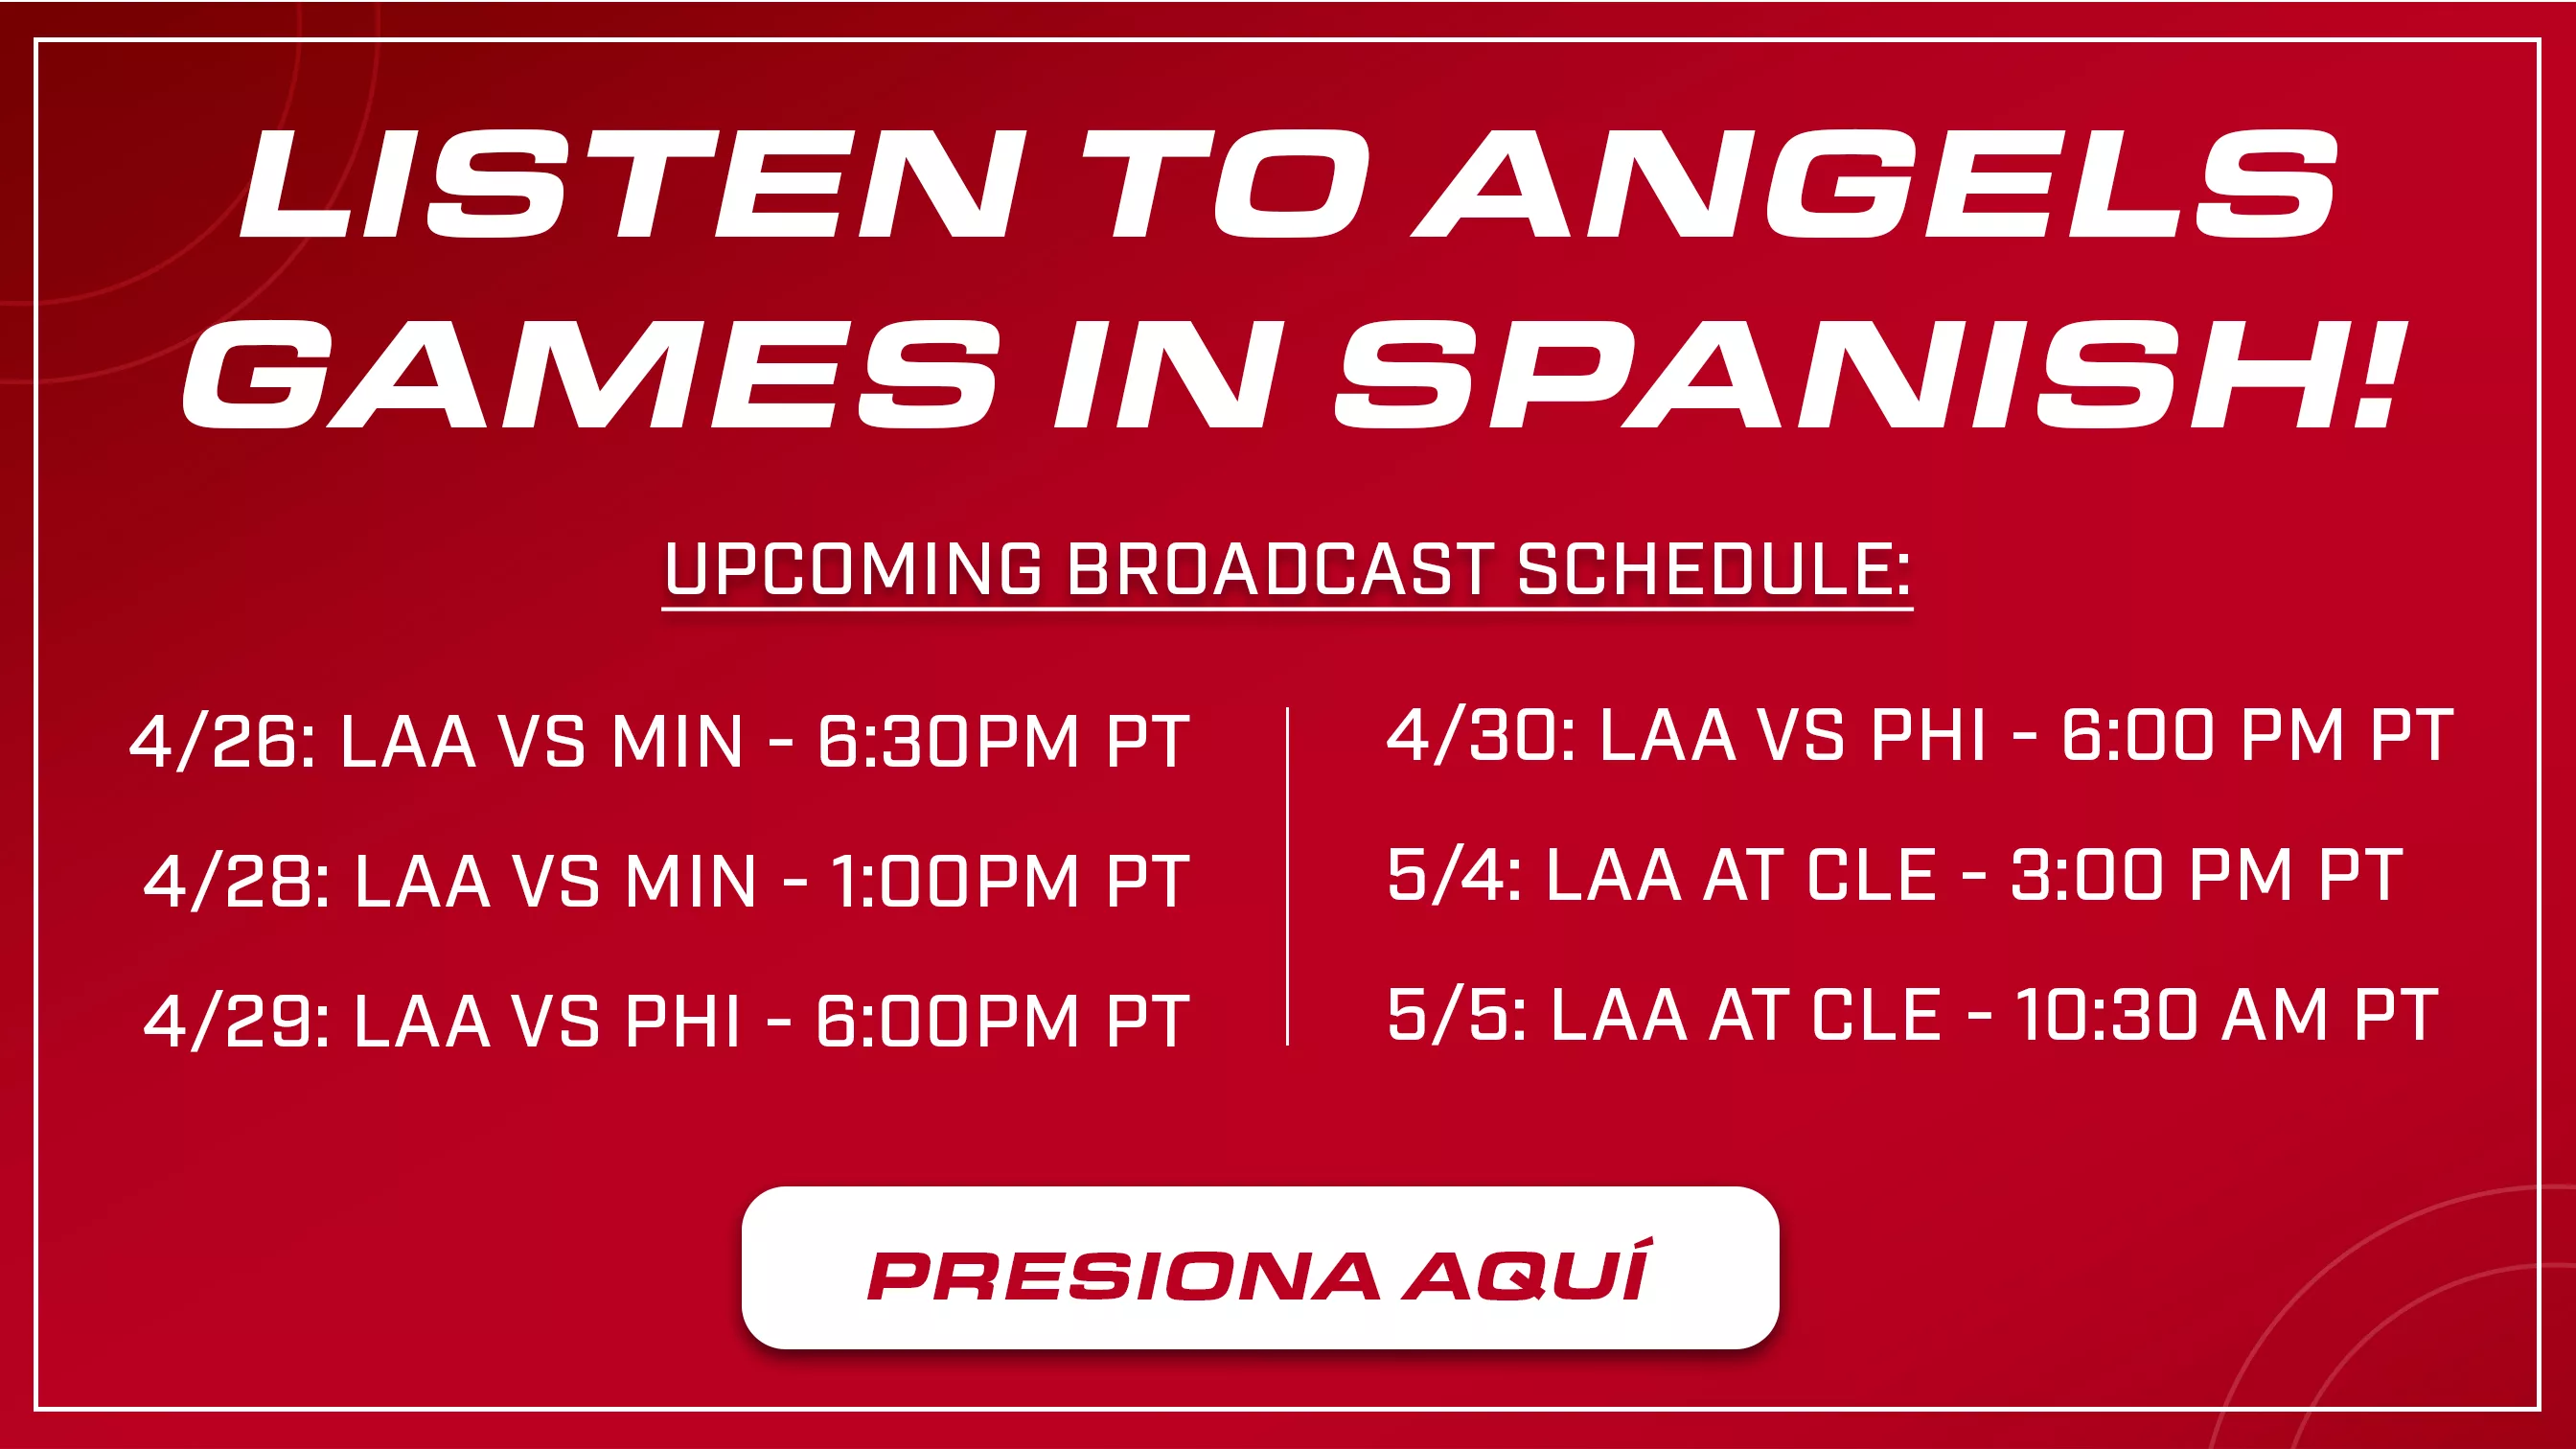 Listen to Angels games in Spanish! Upcoming broadcast schedule. Presiona aquí. 